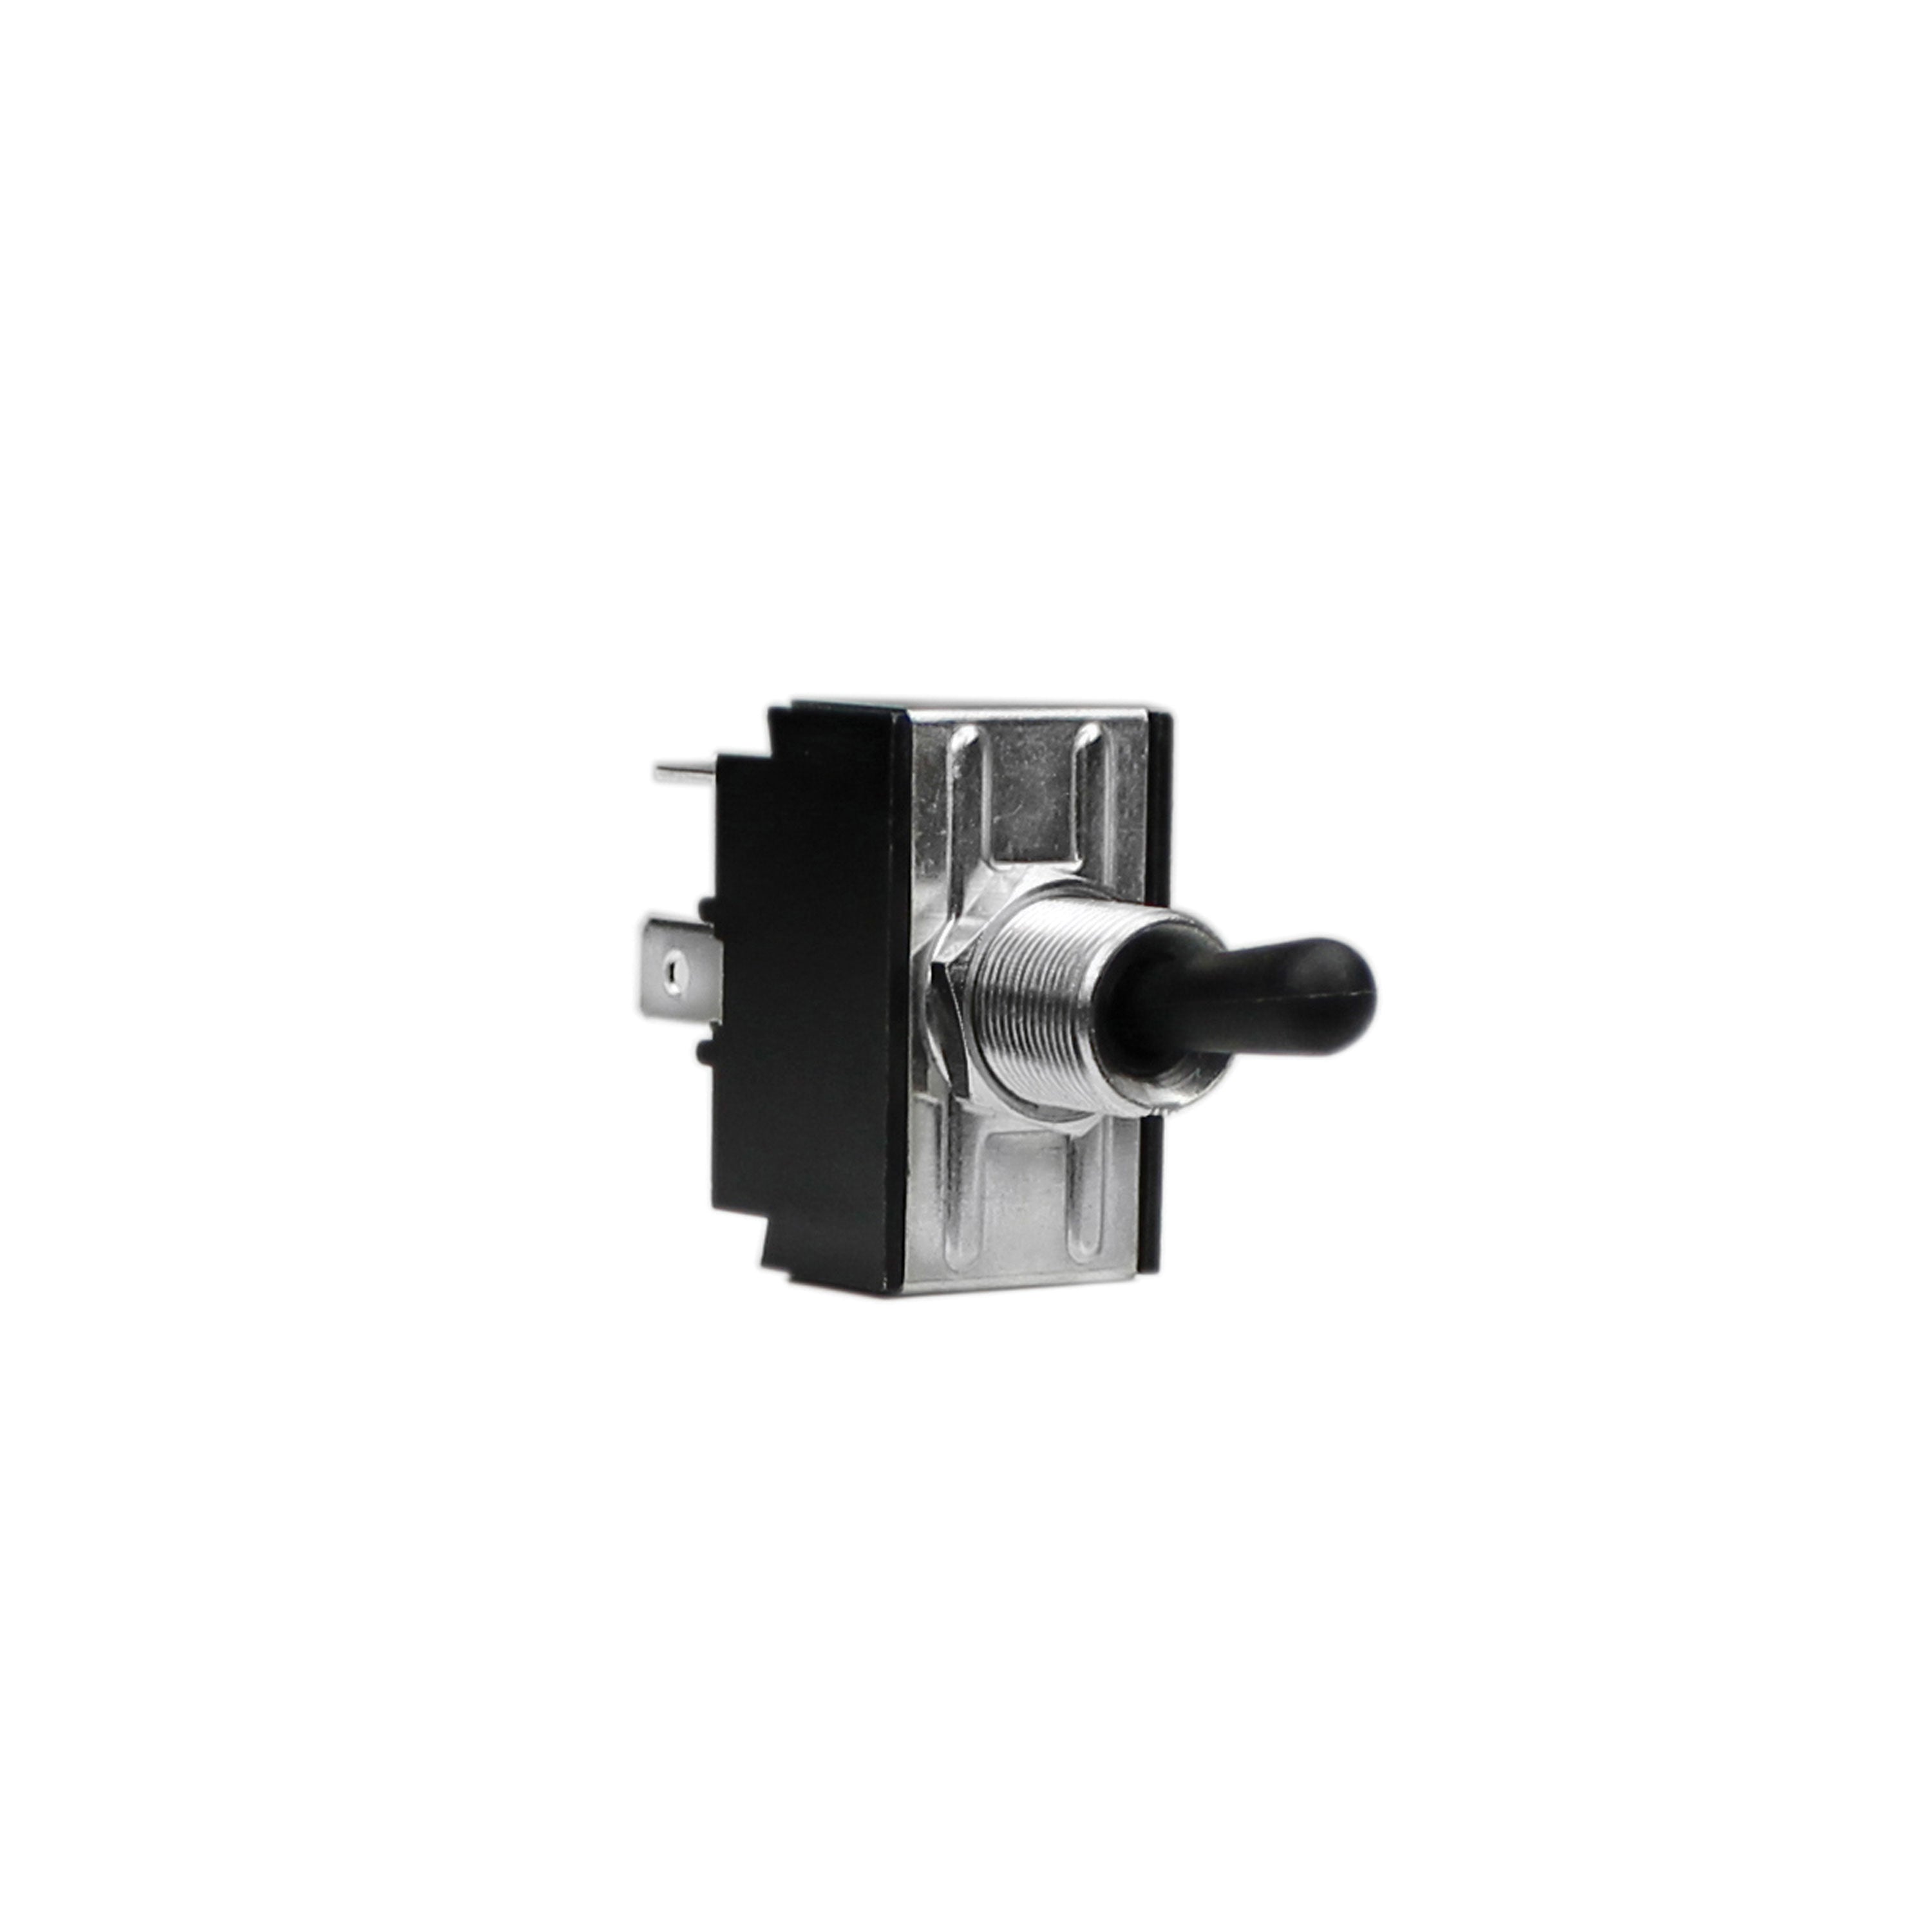 Quick Products B Replacement Light Switch for Electric Tongue Jack